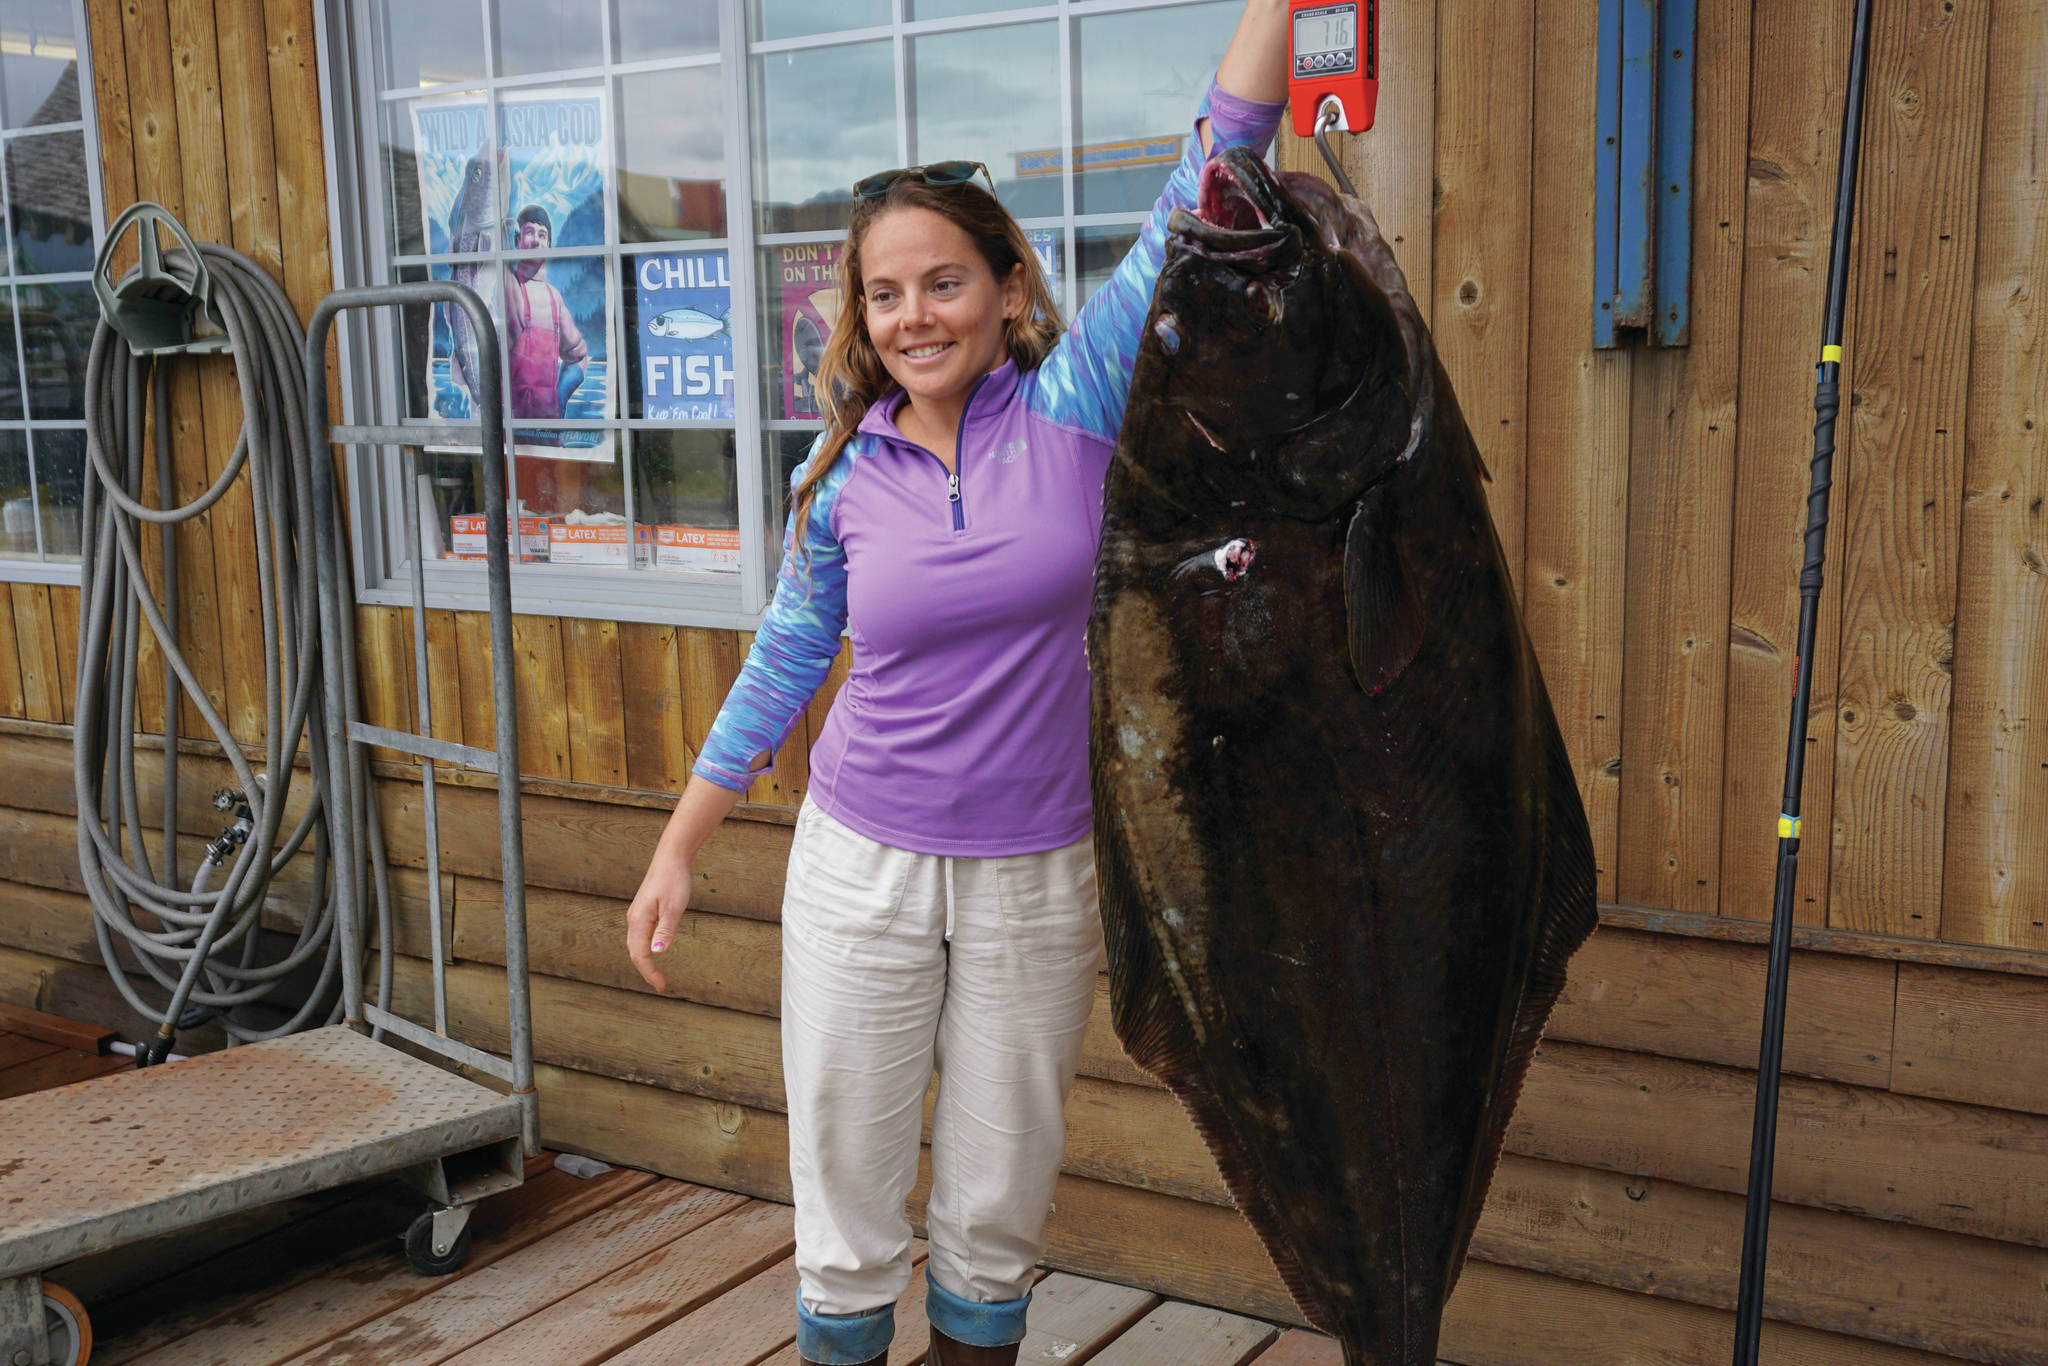 Lisa Stengel of Fort Lauderdale, Florida, weighs a halibut on Monday, July 12, 2021, at Coal Point Seafoods in Homer, Alaska, that she caught with a pole spear while free diving in Kachemak Bay. If verified, the 71.4-pound halibut would be the International Underwater Spearfishing Association world record for a Pacific halibut caught be a woman using a pole spear. (Photo by Michael Armstrong/Homer News)